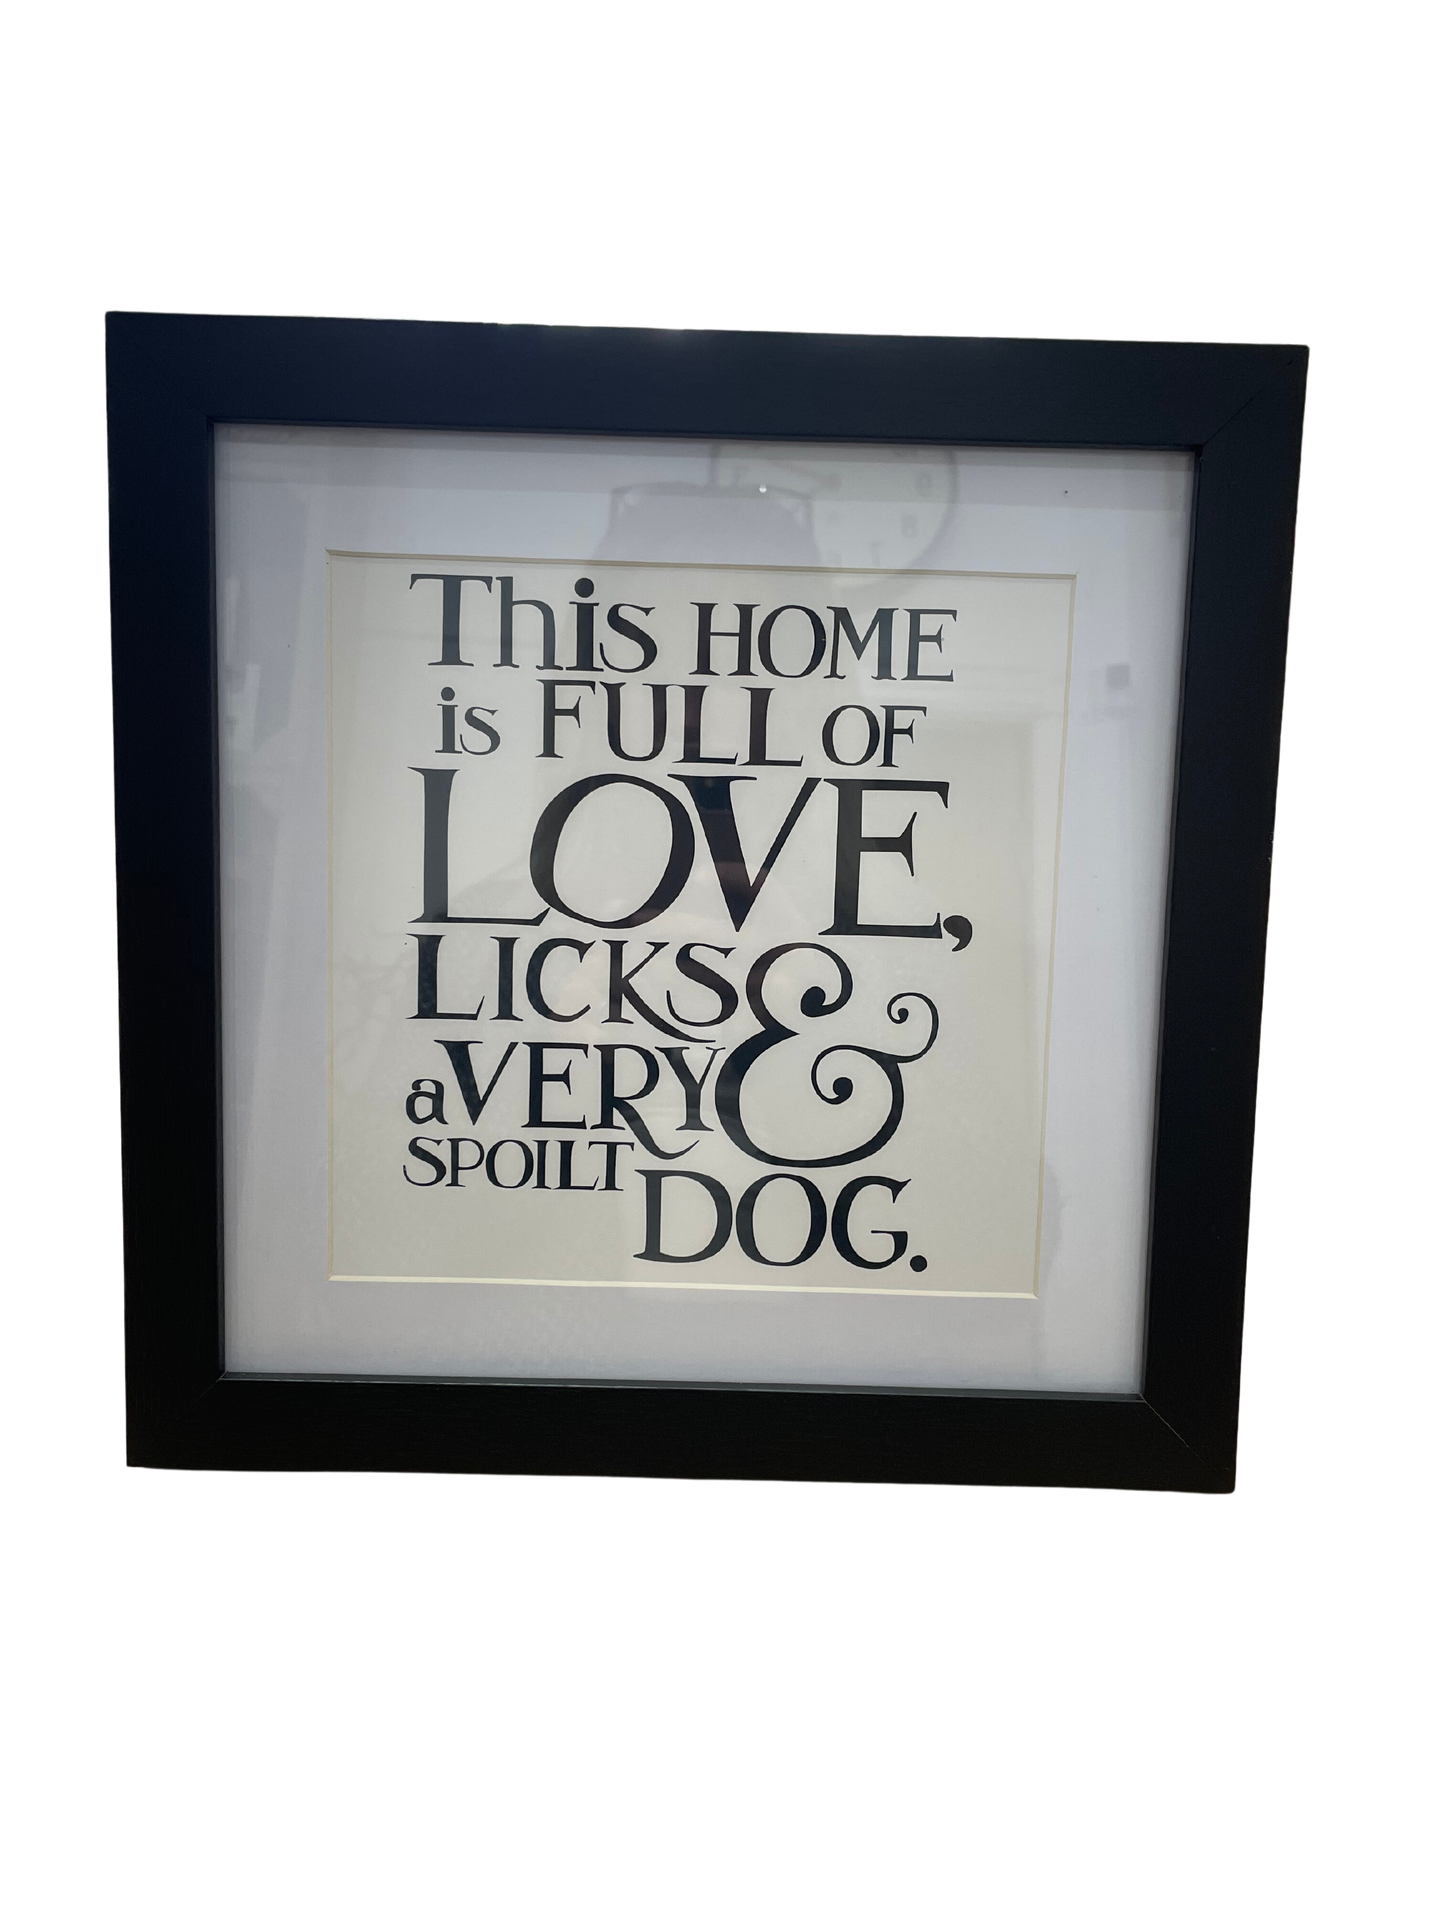 Framed Phrase Prints - This home is full of Love, Licks & a very spoilt Dog